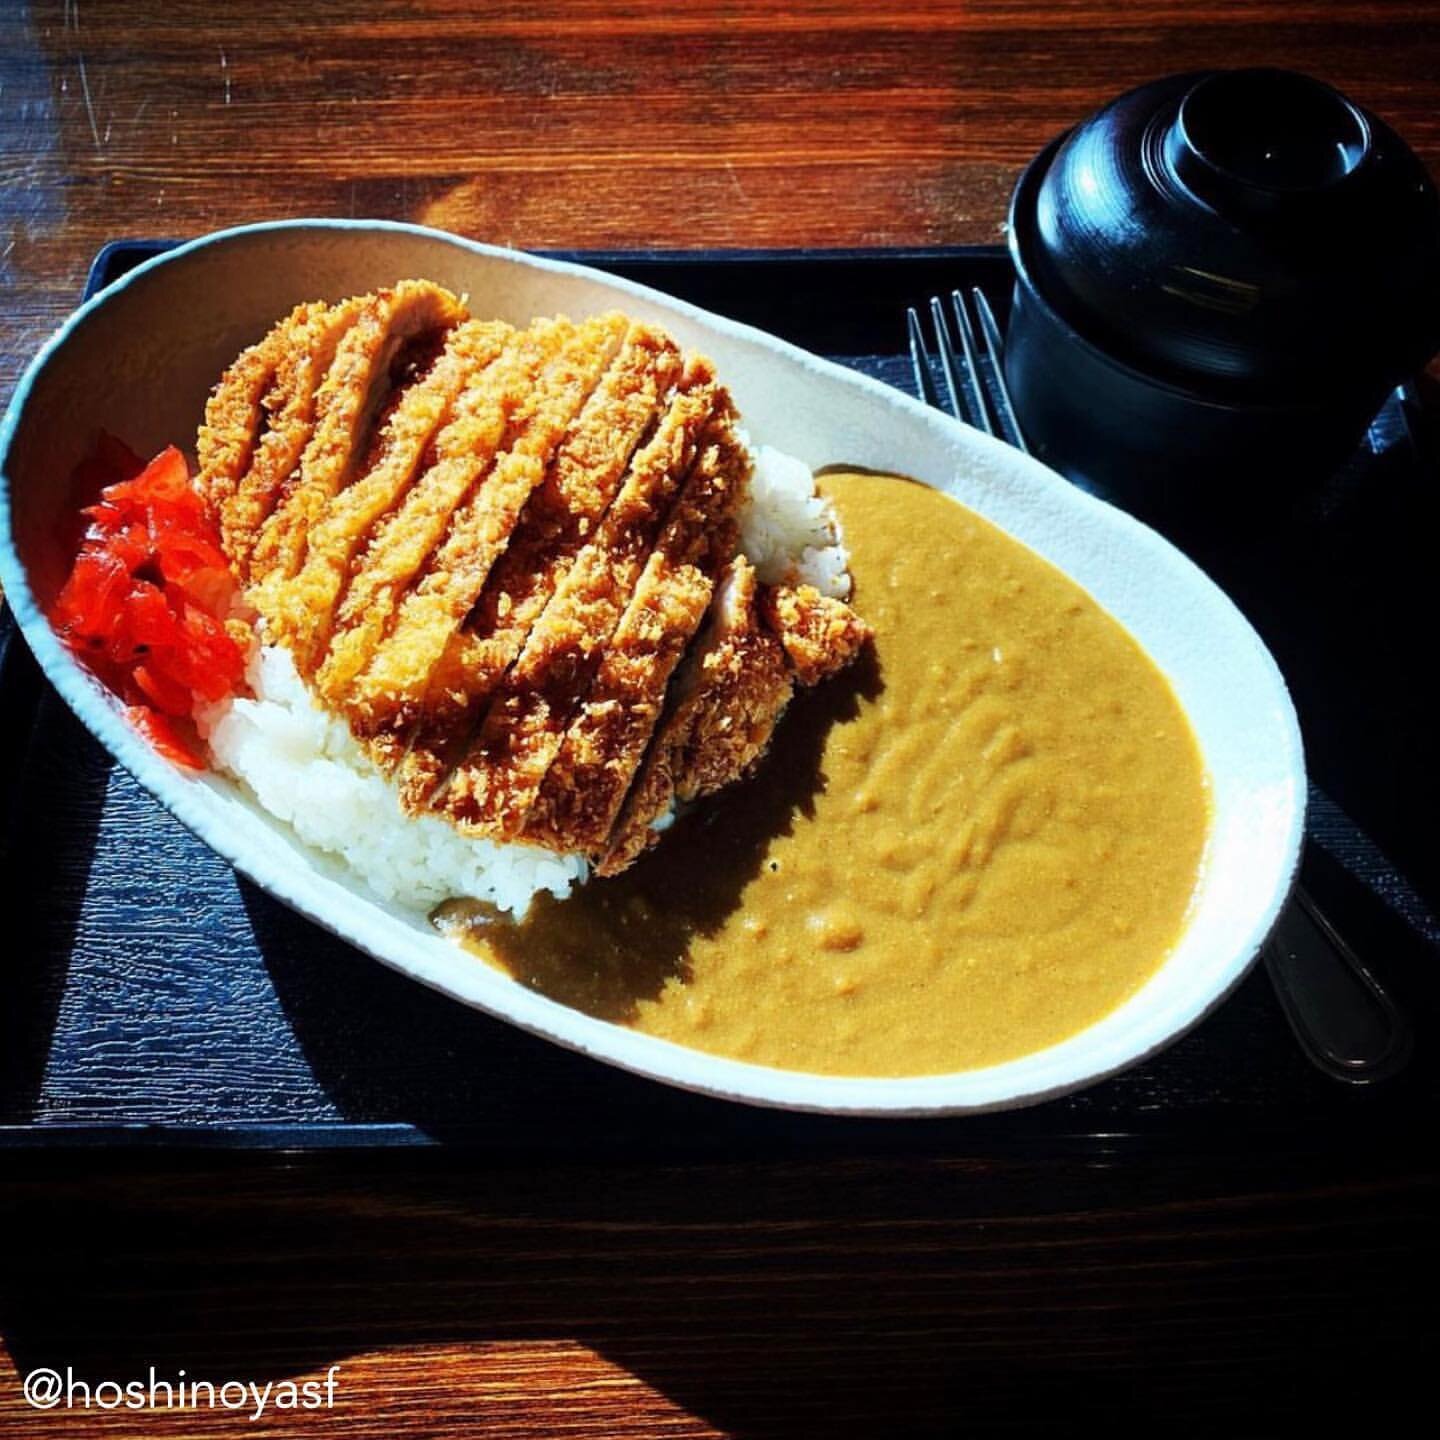 CURRY 4 CURRY IN JTOWN😋🏀

Come to San Francisco&rsquo;s Japantown and enjoy a delicious curry dish from places like @sfonthebridge and @hoshinoyasf while cheering on Steph Curry and the Warriors the 2023 NBA Playoffs! 

Join our Curry 4 Curry campa